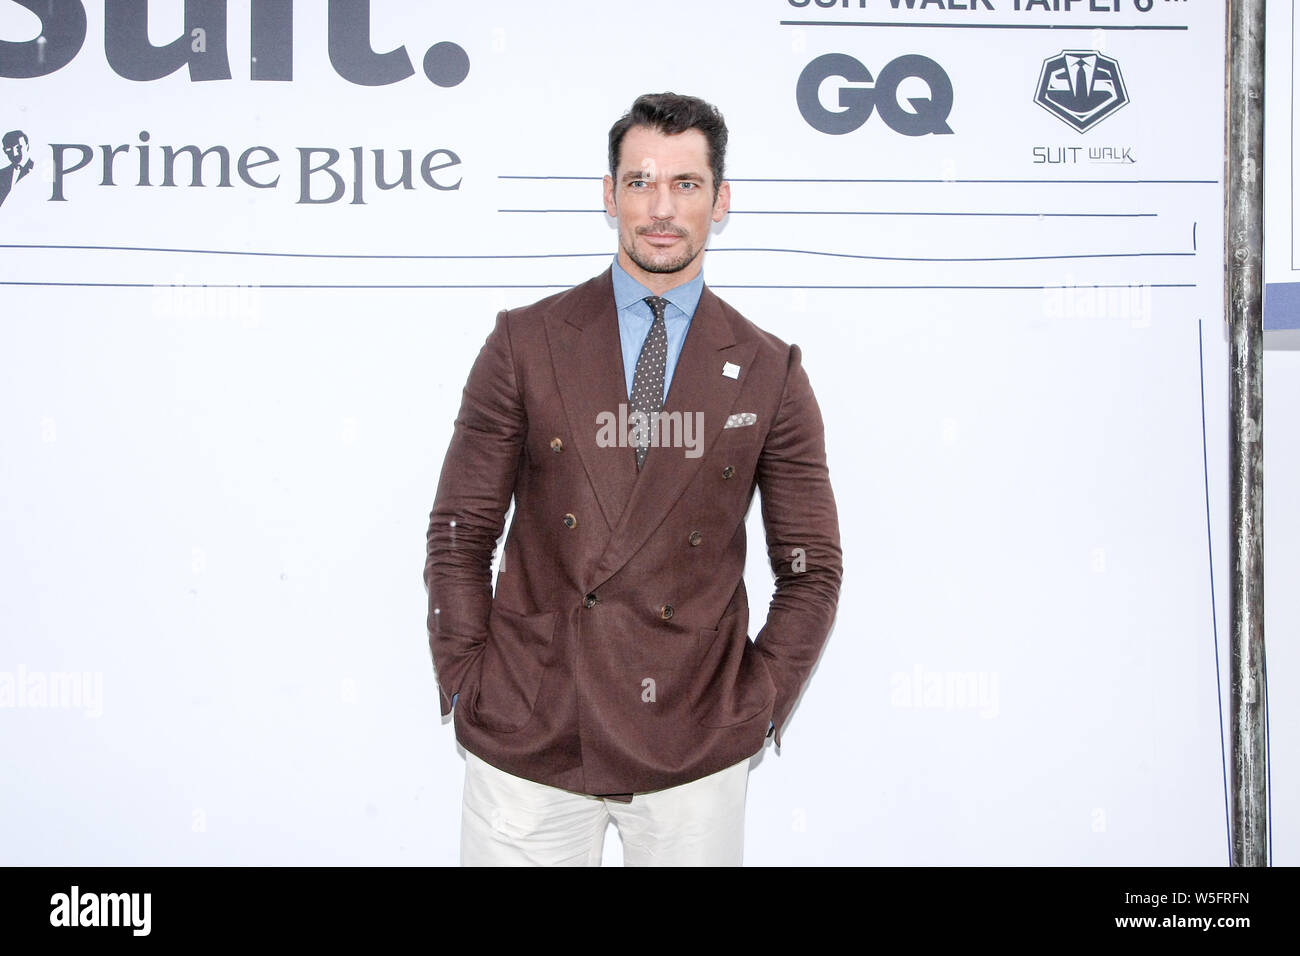 British model David Gandy attends the GQ Suit Walk event in Taipei, Taiwan, 9 March 2019. Stock Photo